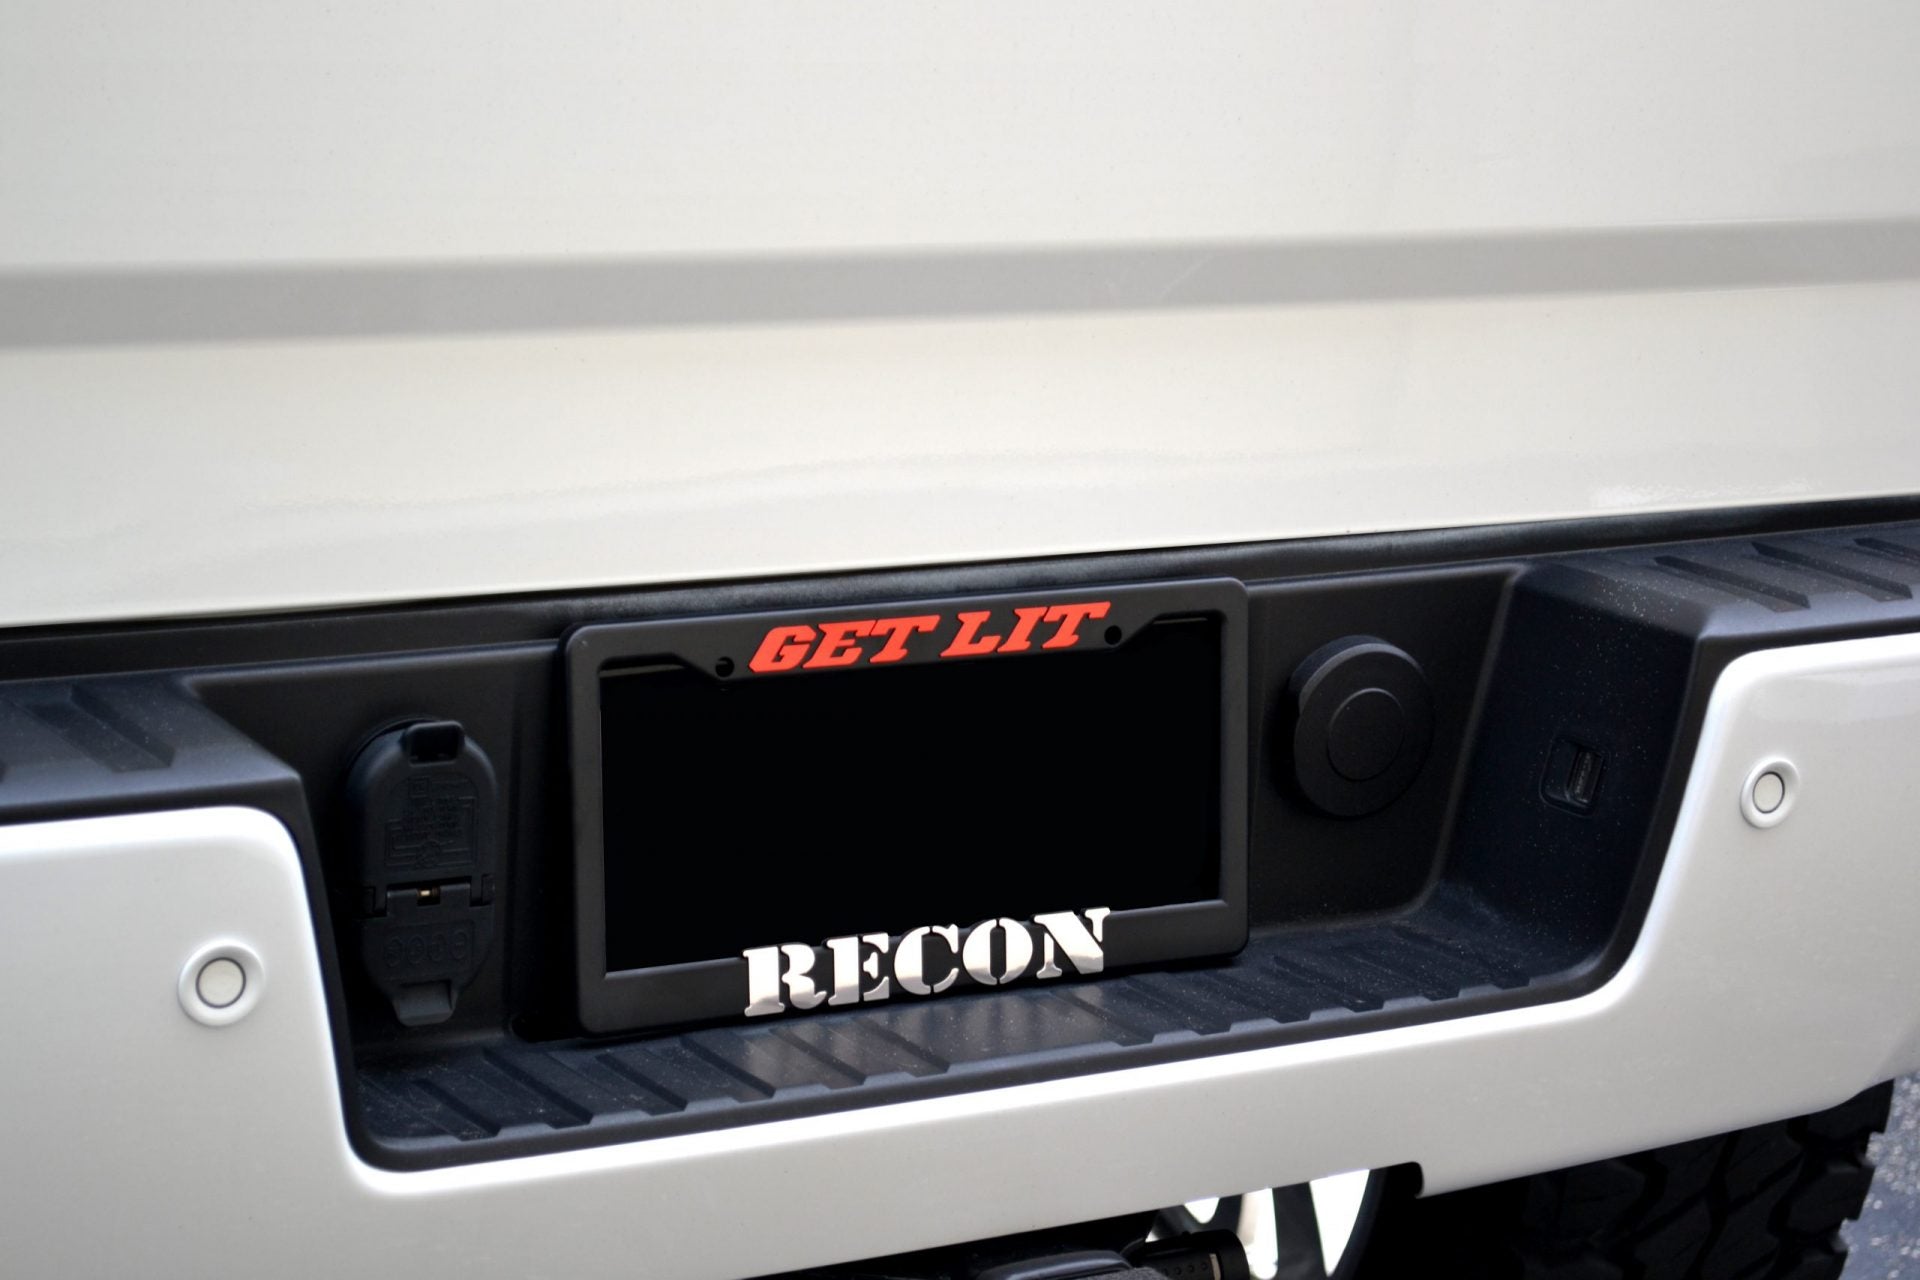 GET LIT by RECON License Plate Frame